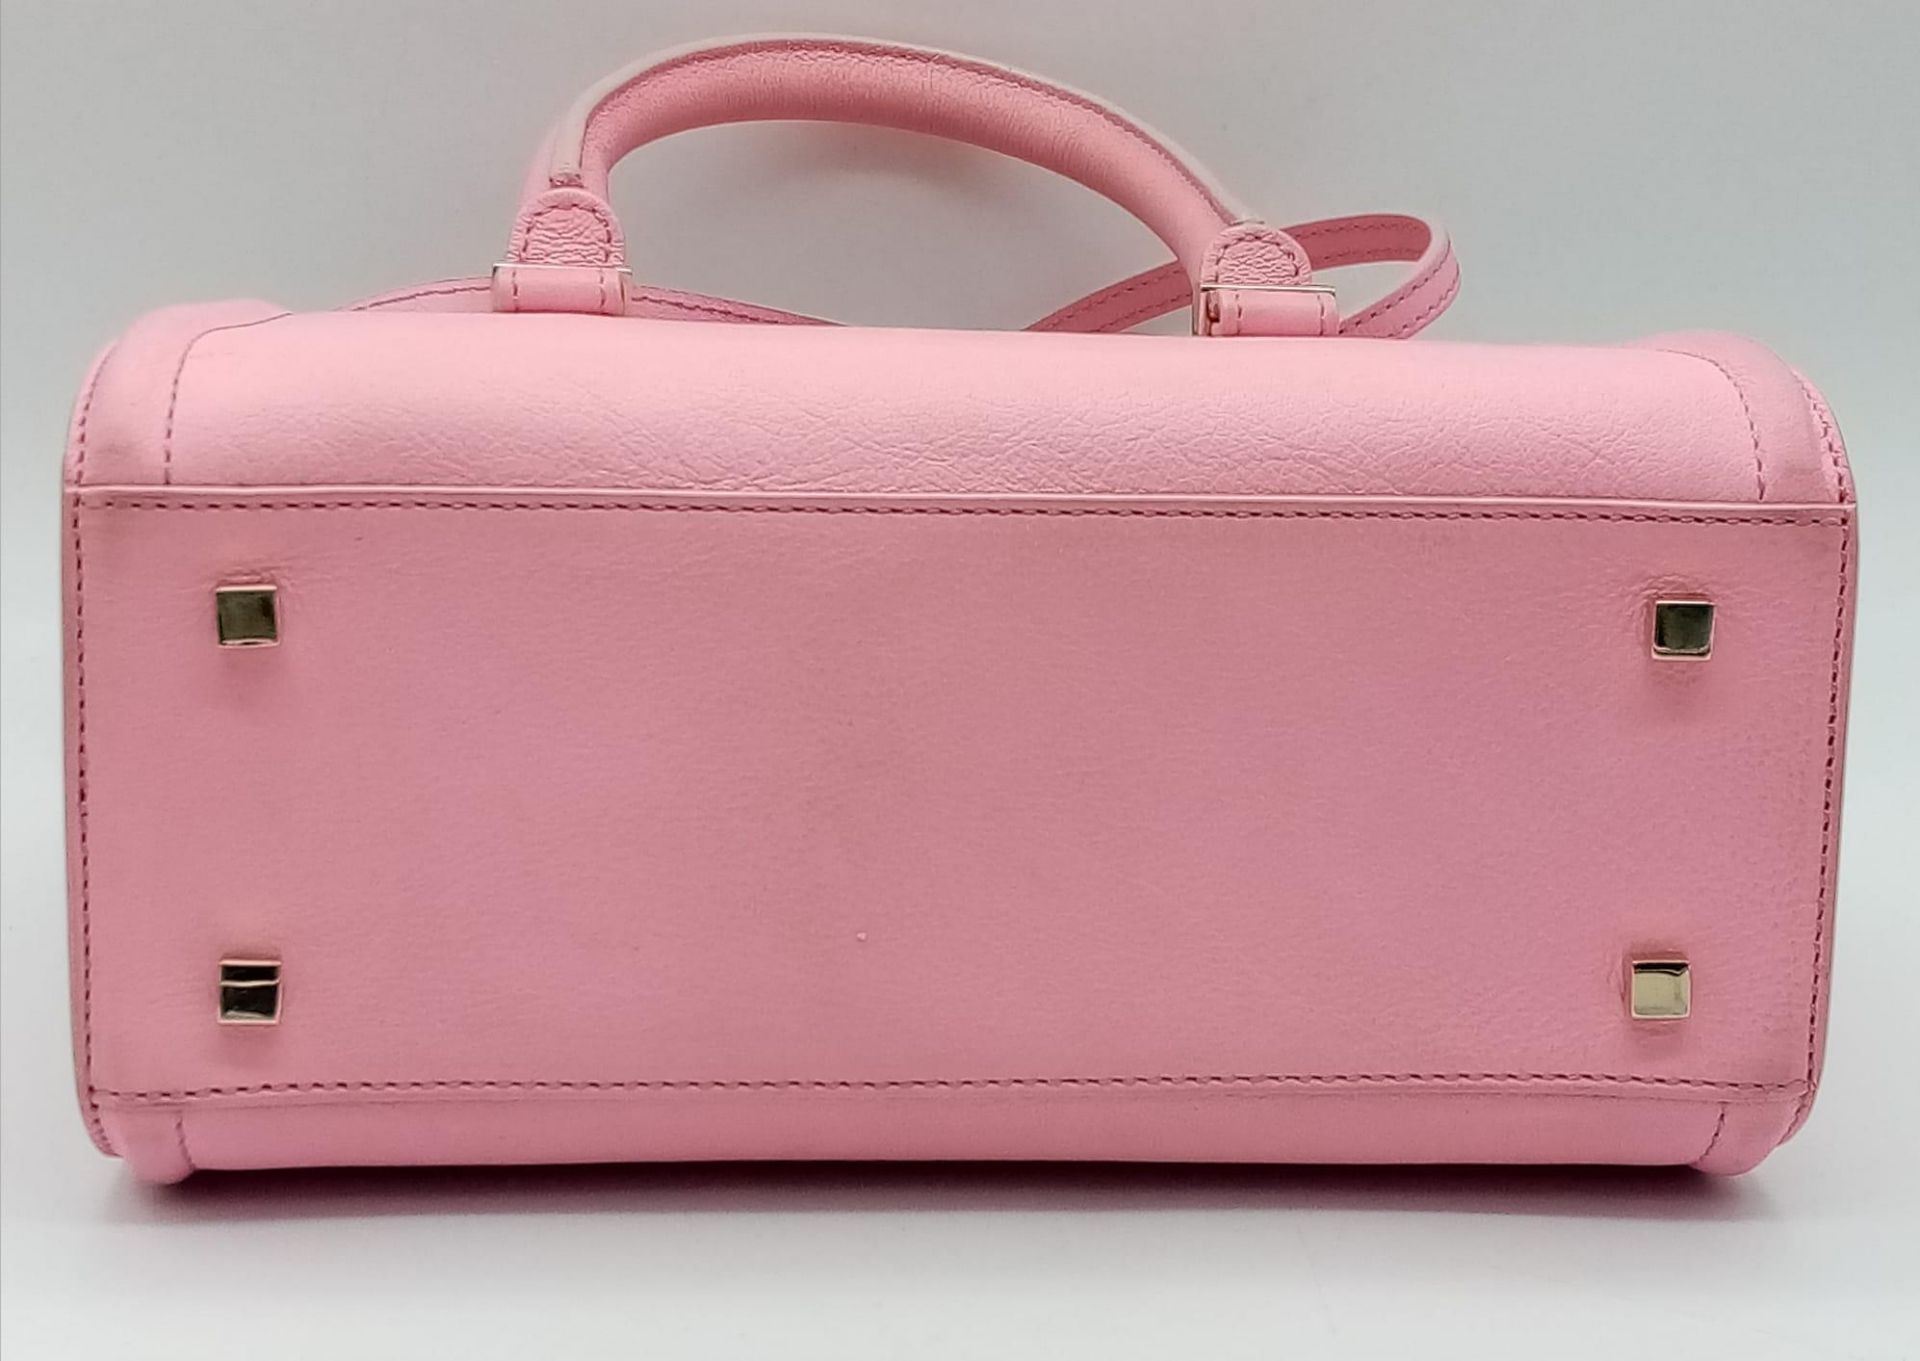 A Victoria Beckham two toned candy pink textured leather mini bag, patent leather trim with gold - Bild 4 aus 8